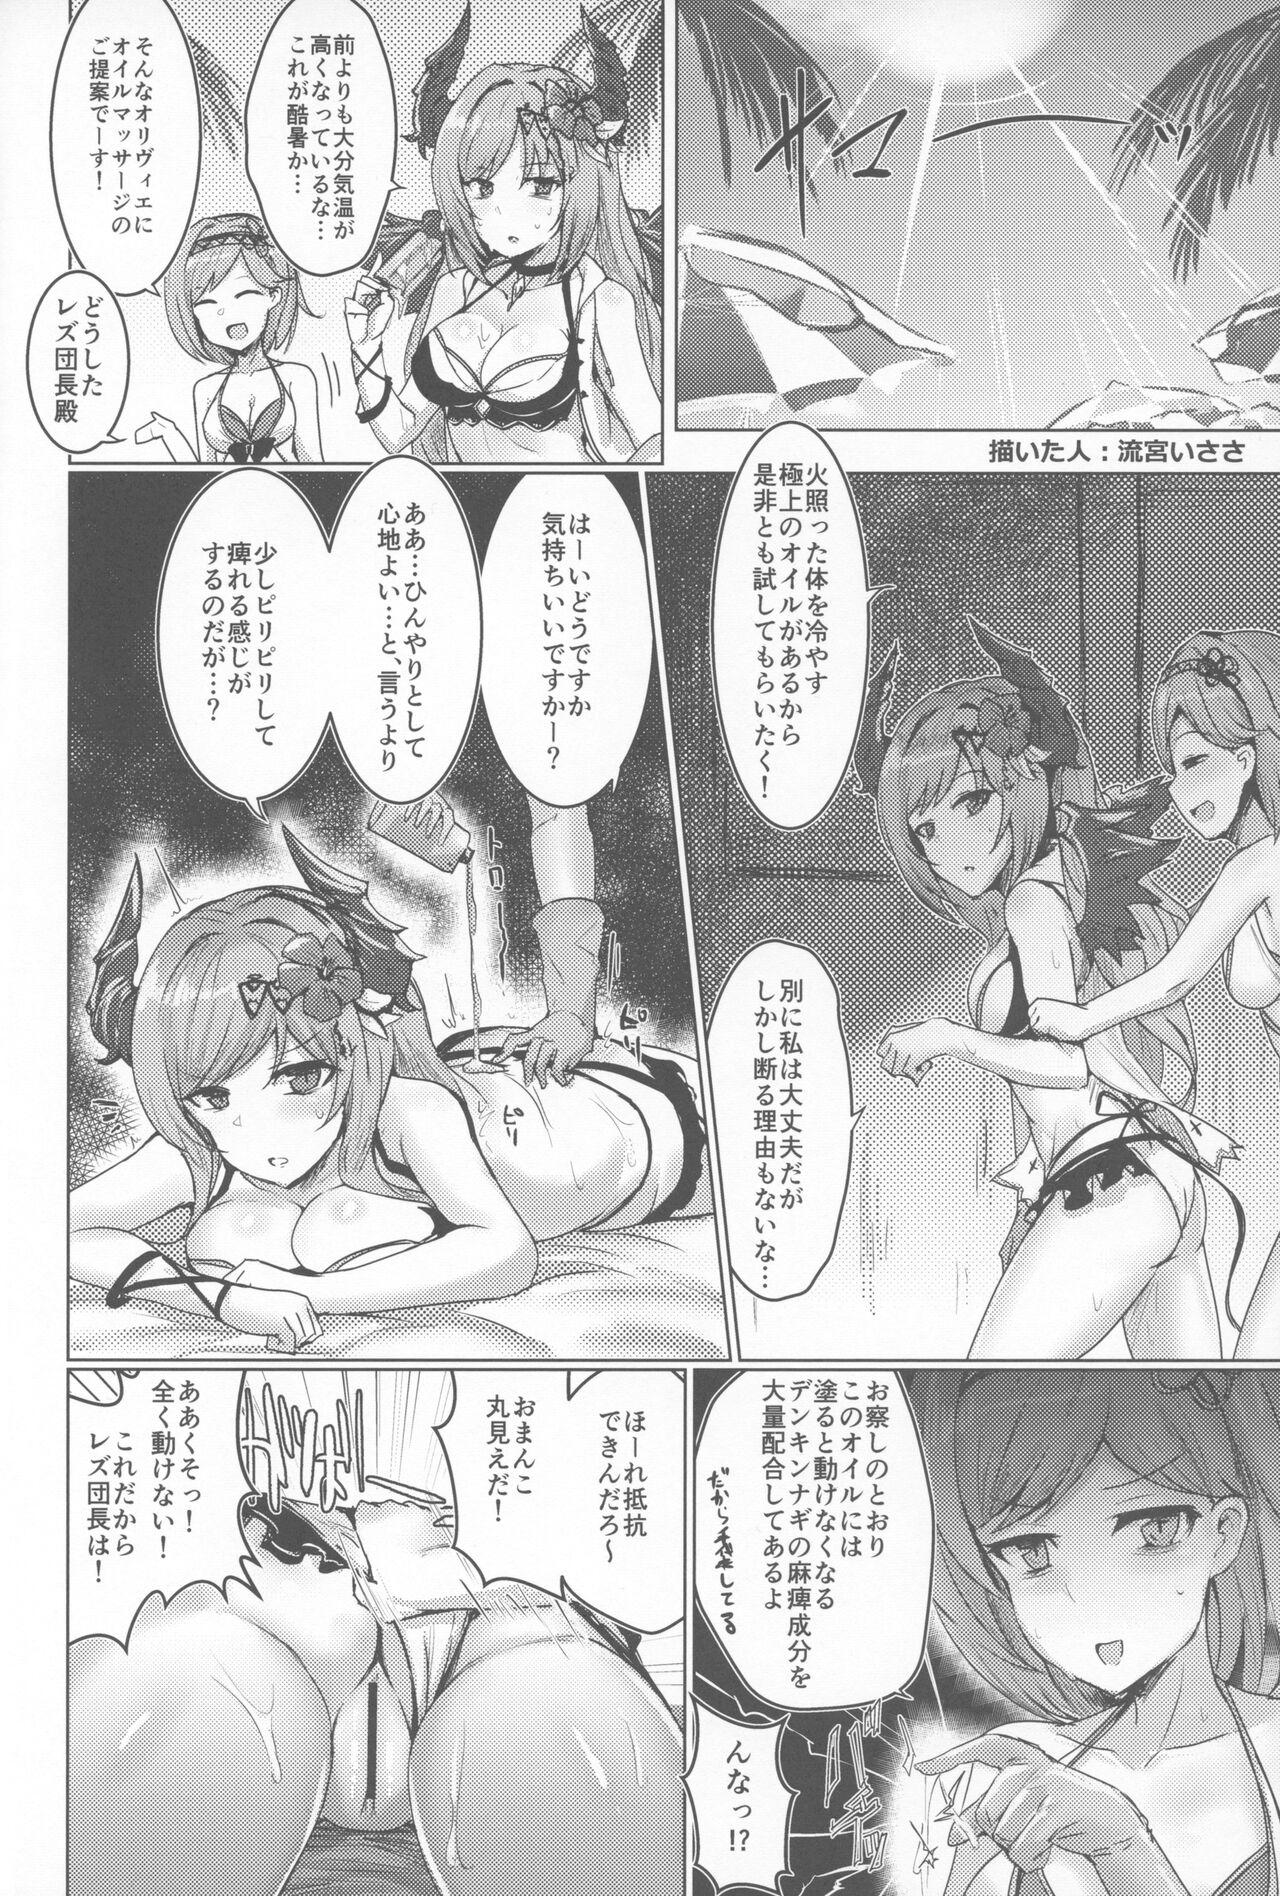 Wet Cunts Seishou Gathering - Granblue fantasy Hot - Page 3